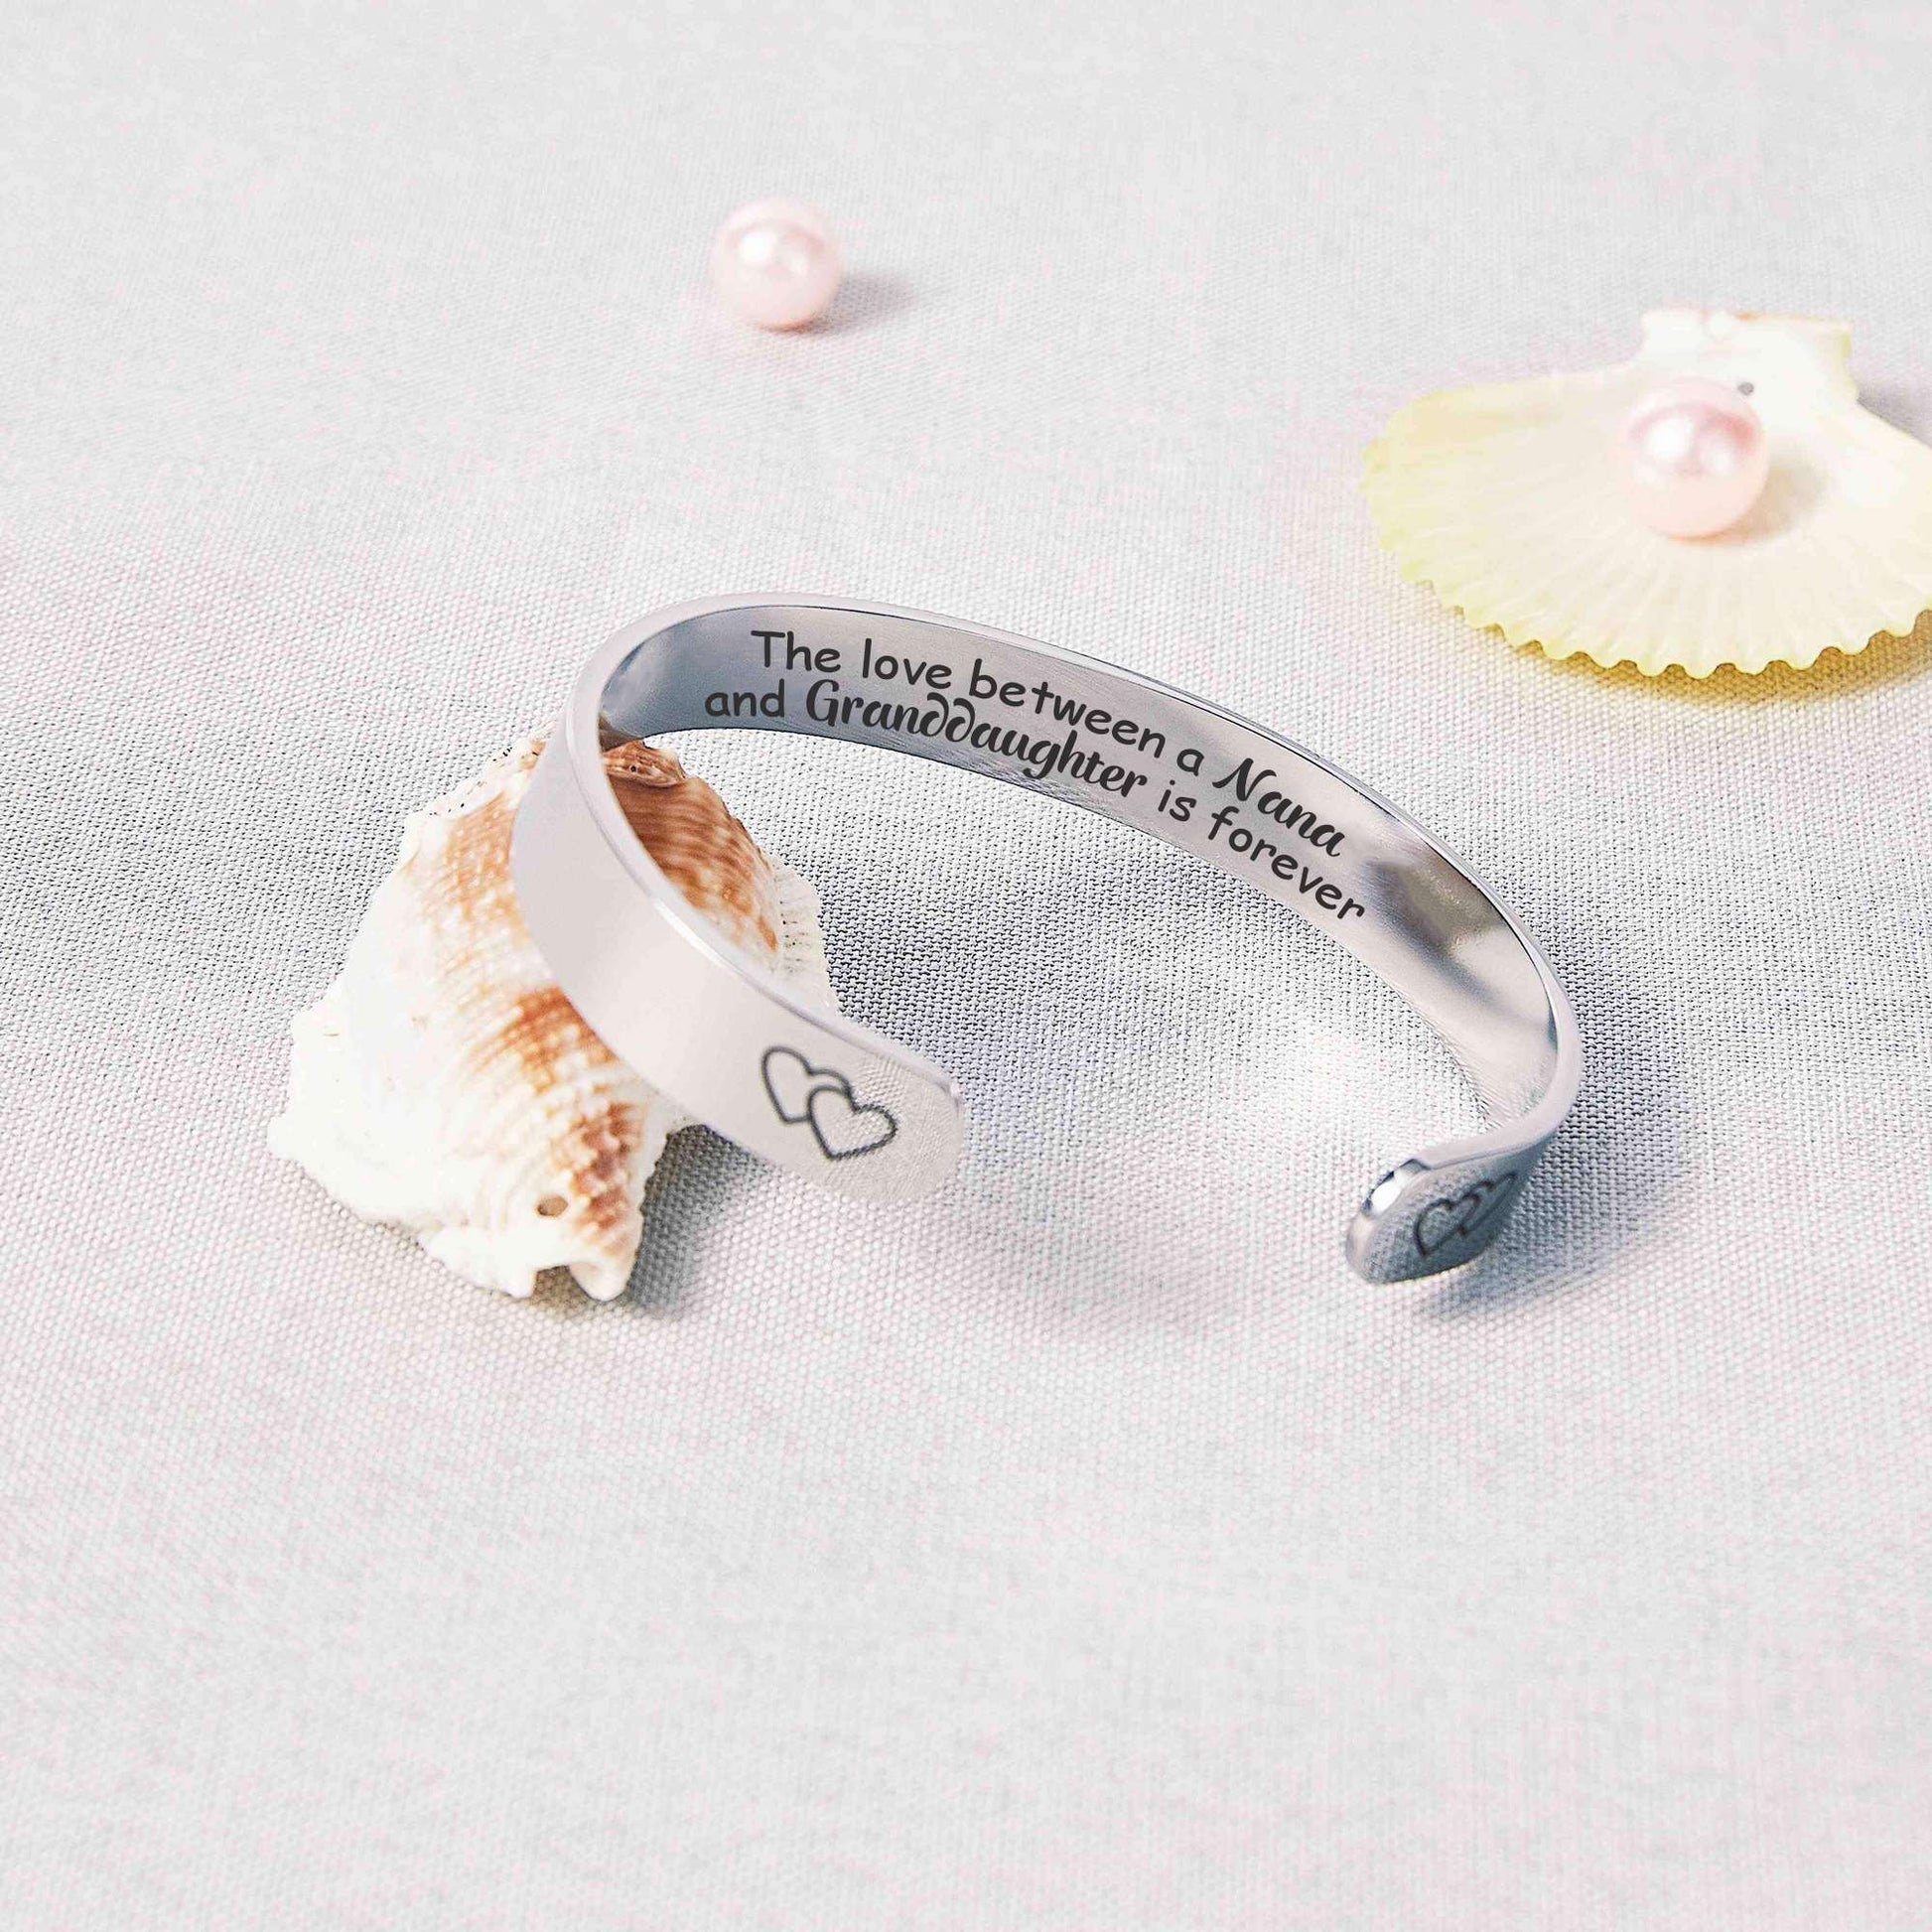 TO MY GRANDDAUGHTER "THE LOVE BETWEEN A NANA AND GRANDDAUGHTER IS FOREVER" HEART BRACELET - SARAH'S WHISPER